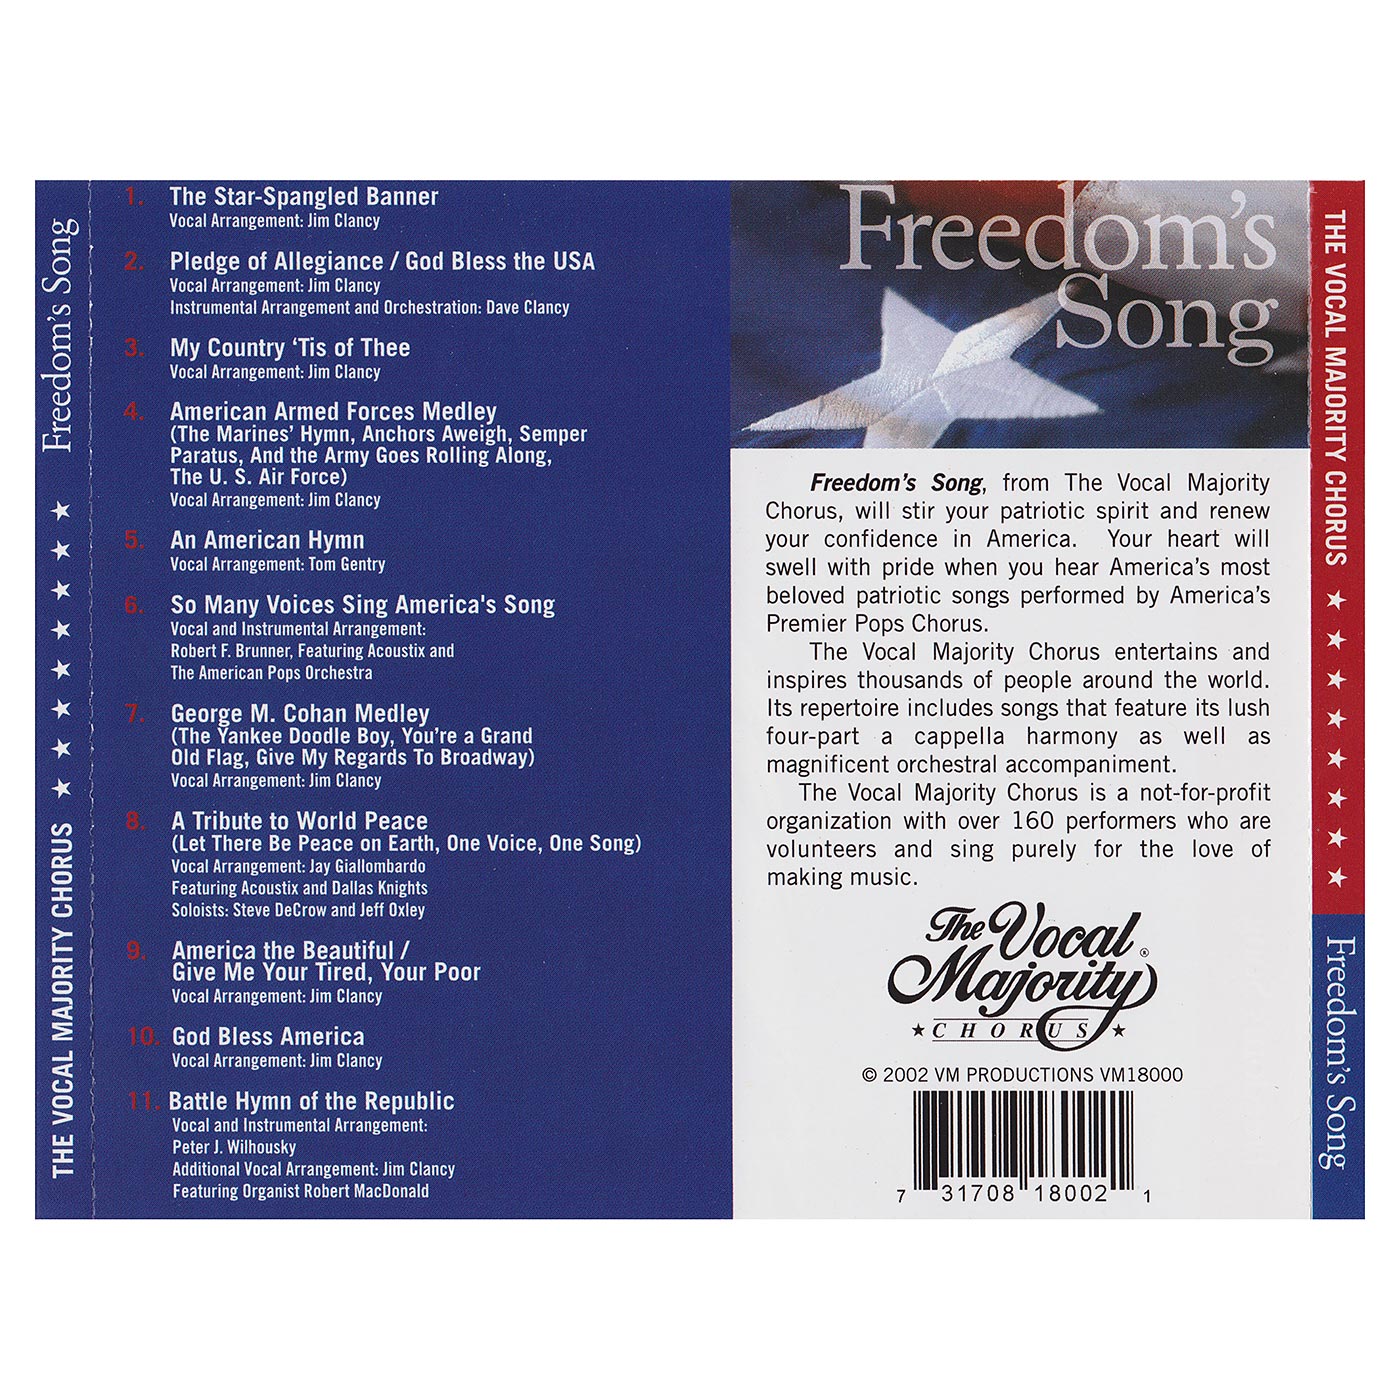 Tray Card Outside: Freedom's Song